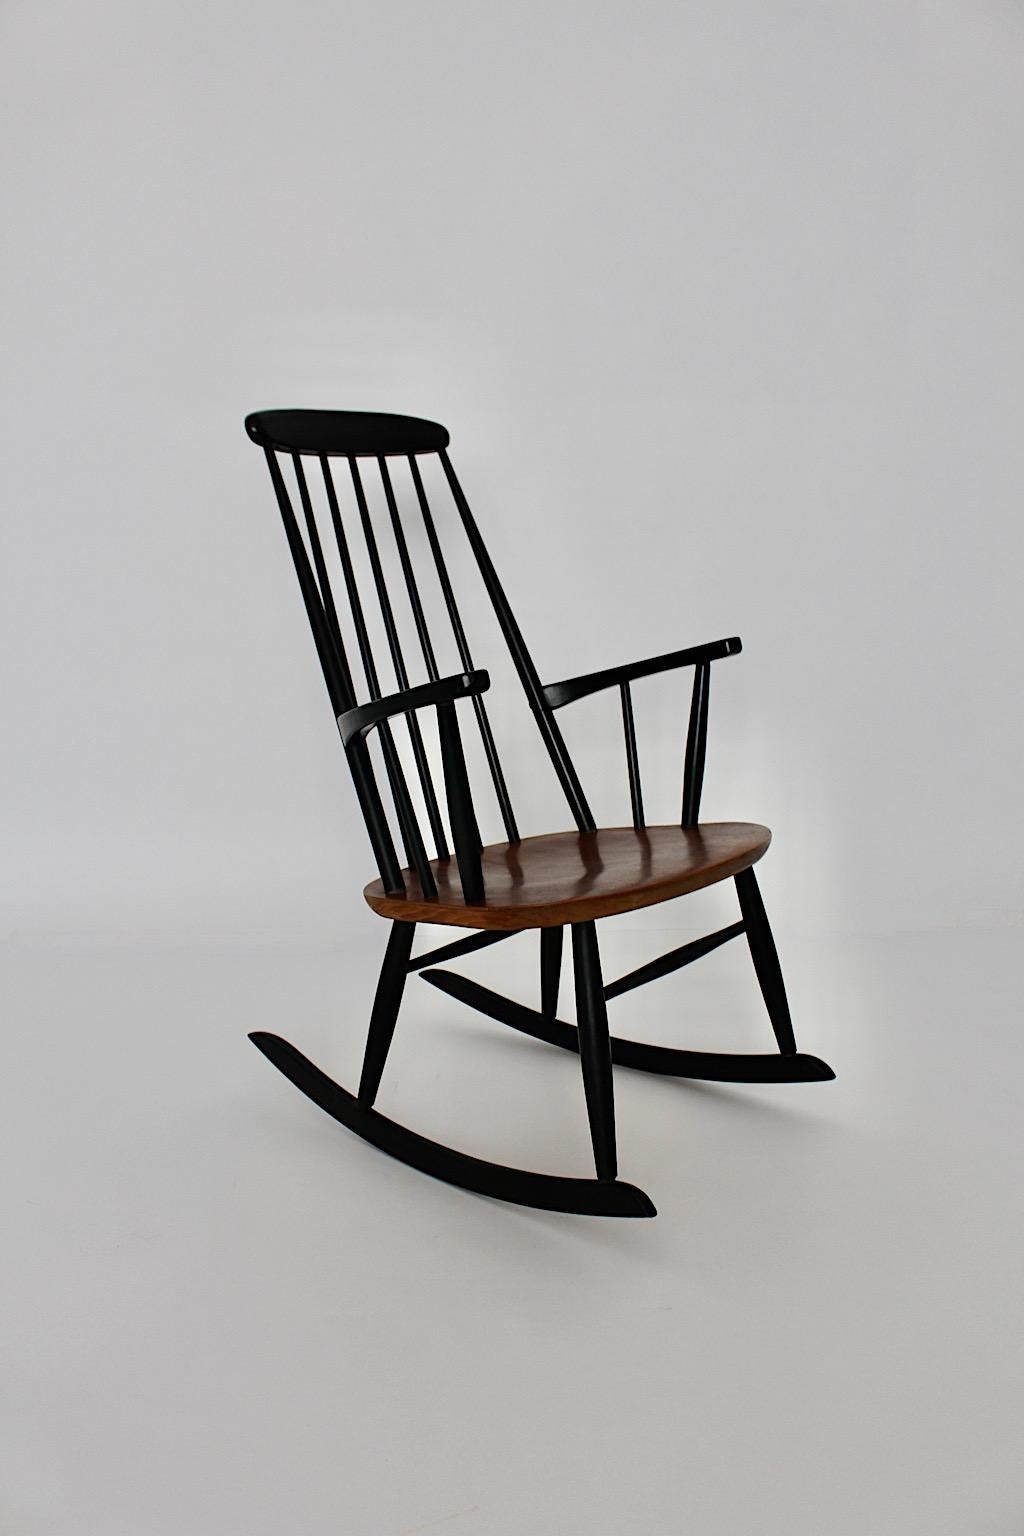 Scandinavian Modern vintage rocking chair from teak in brown and black color by Ilmari Tapiovaara for Asko, Finland 1950s Finland.
An amazing vintage rocking chair in sleek design in warm colors as brown and black.
This rocker could inject some